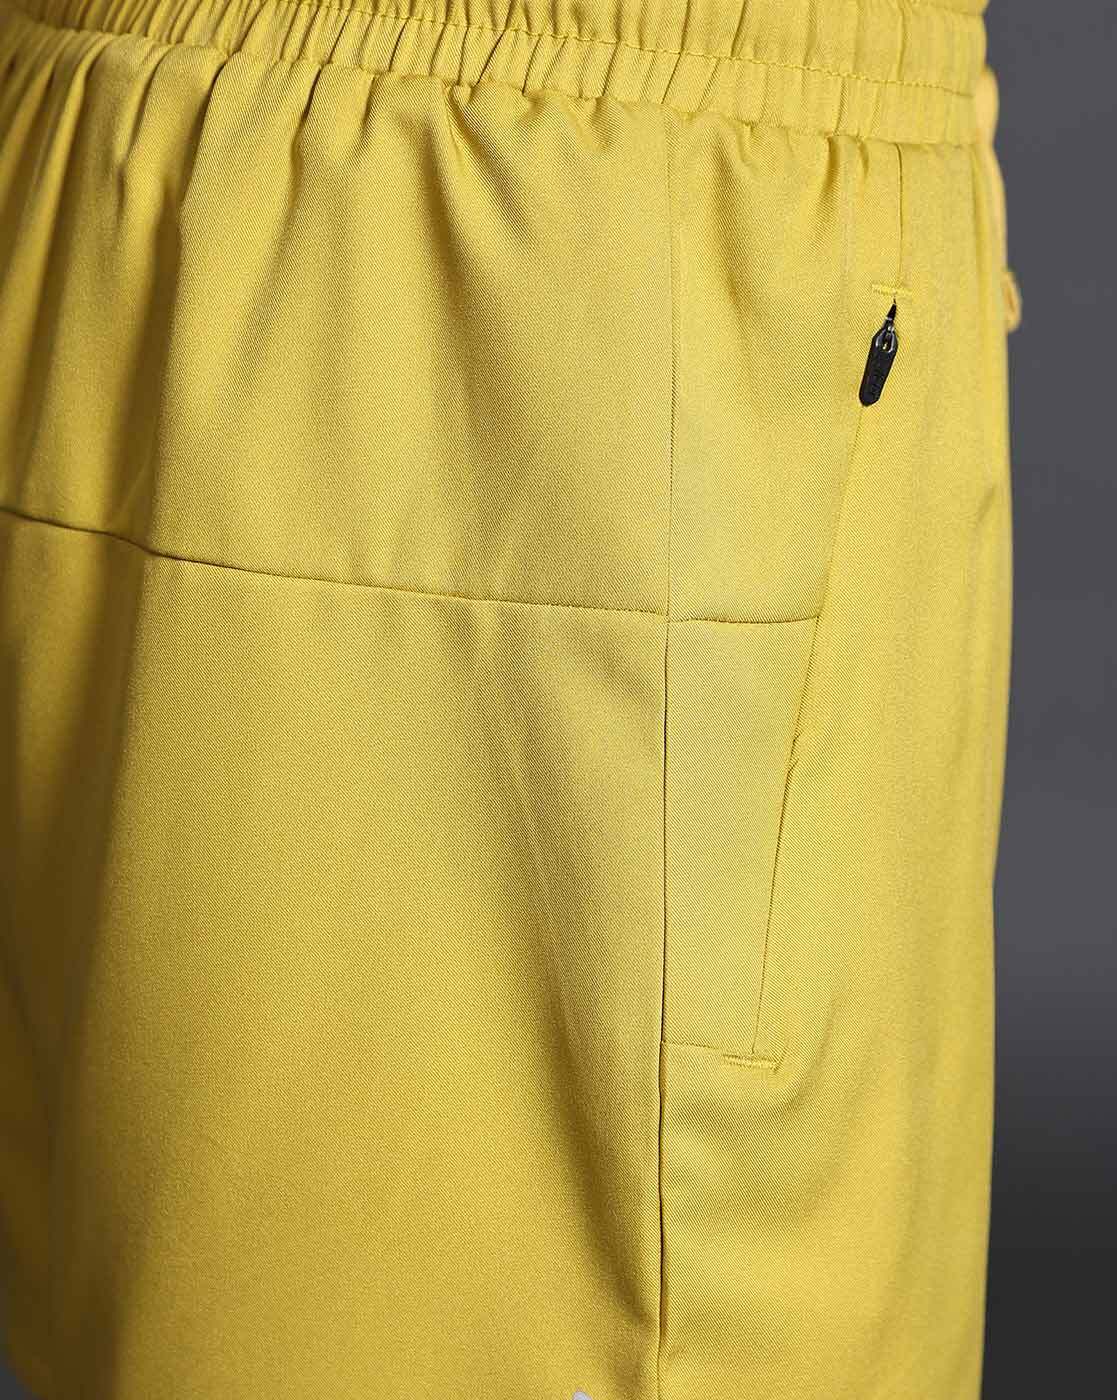 MV20 Recycled Microfiber Elastane Stretch Straight Fit Shorts with Stay  Fresh Treatment